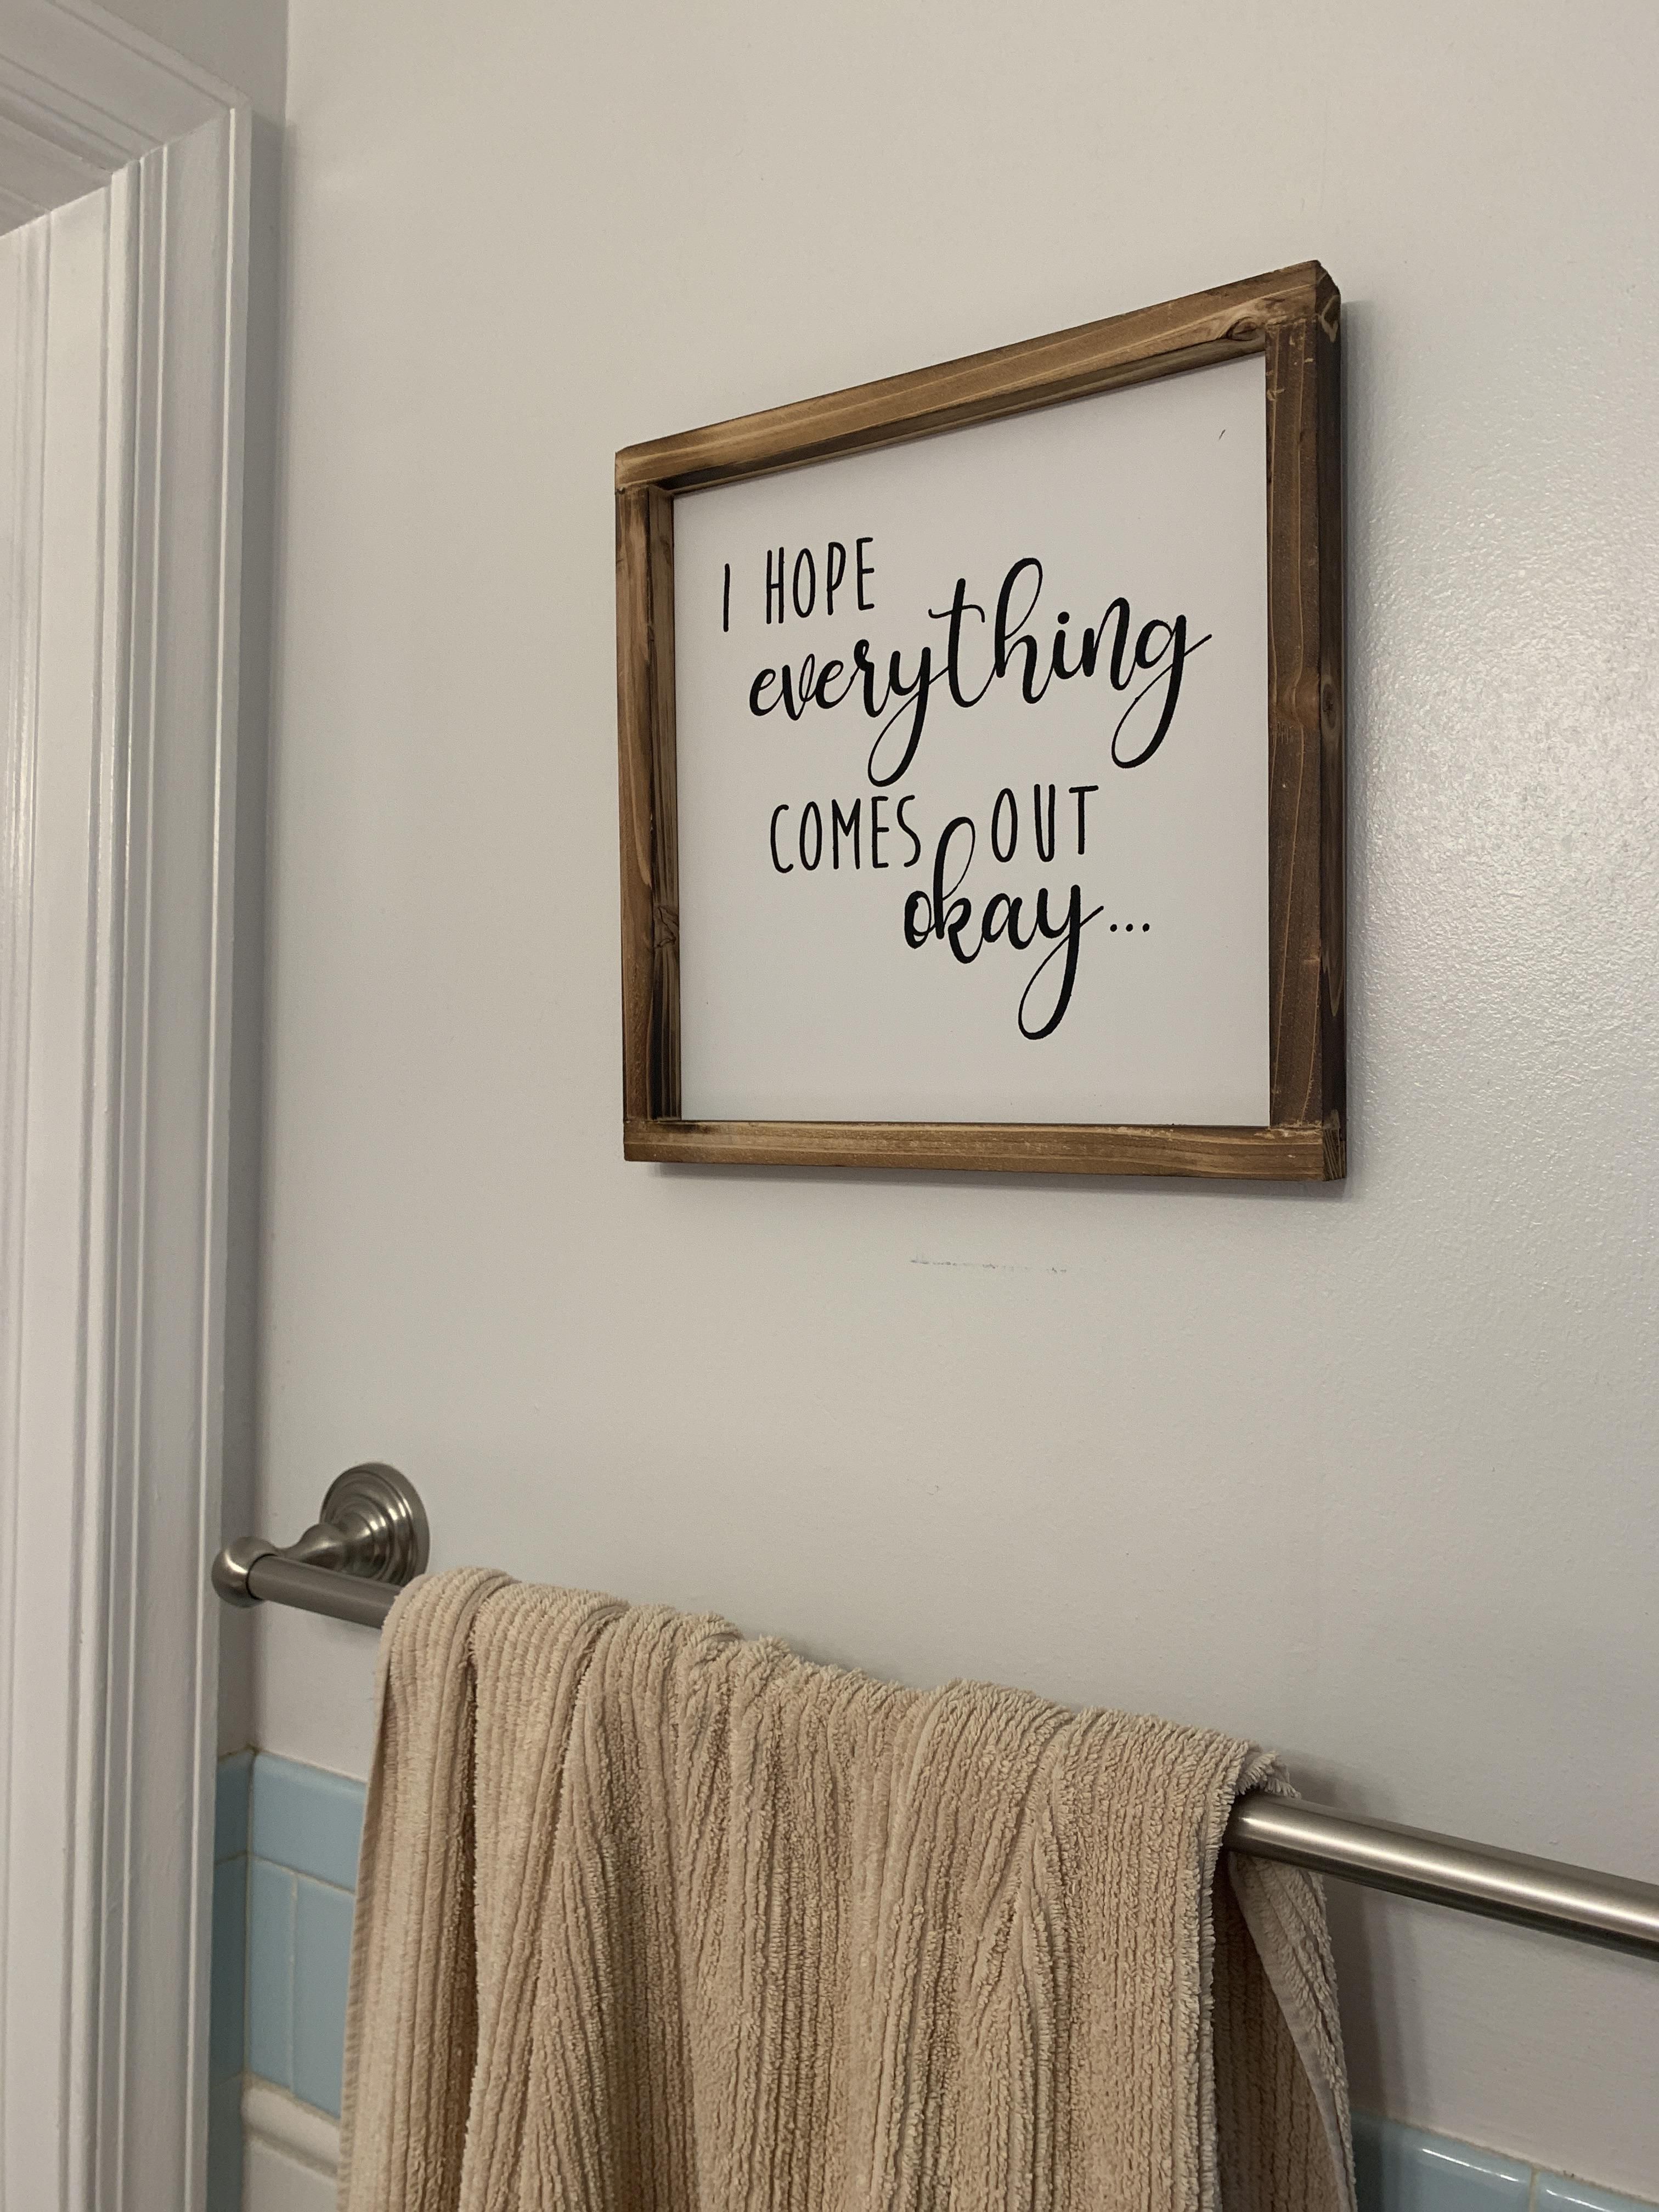 I had rectal surgery recently. Wife decided to redecorate my bathroom.